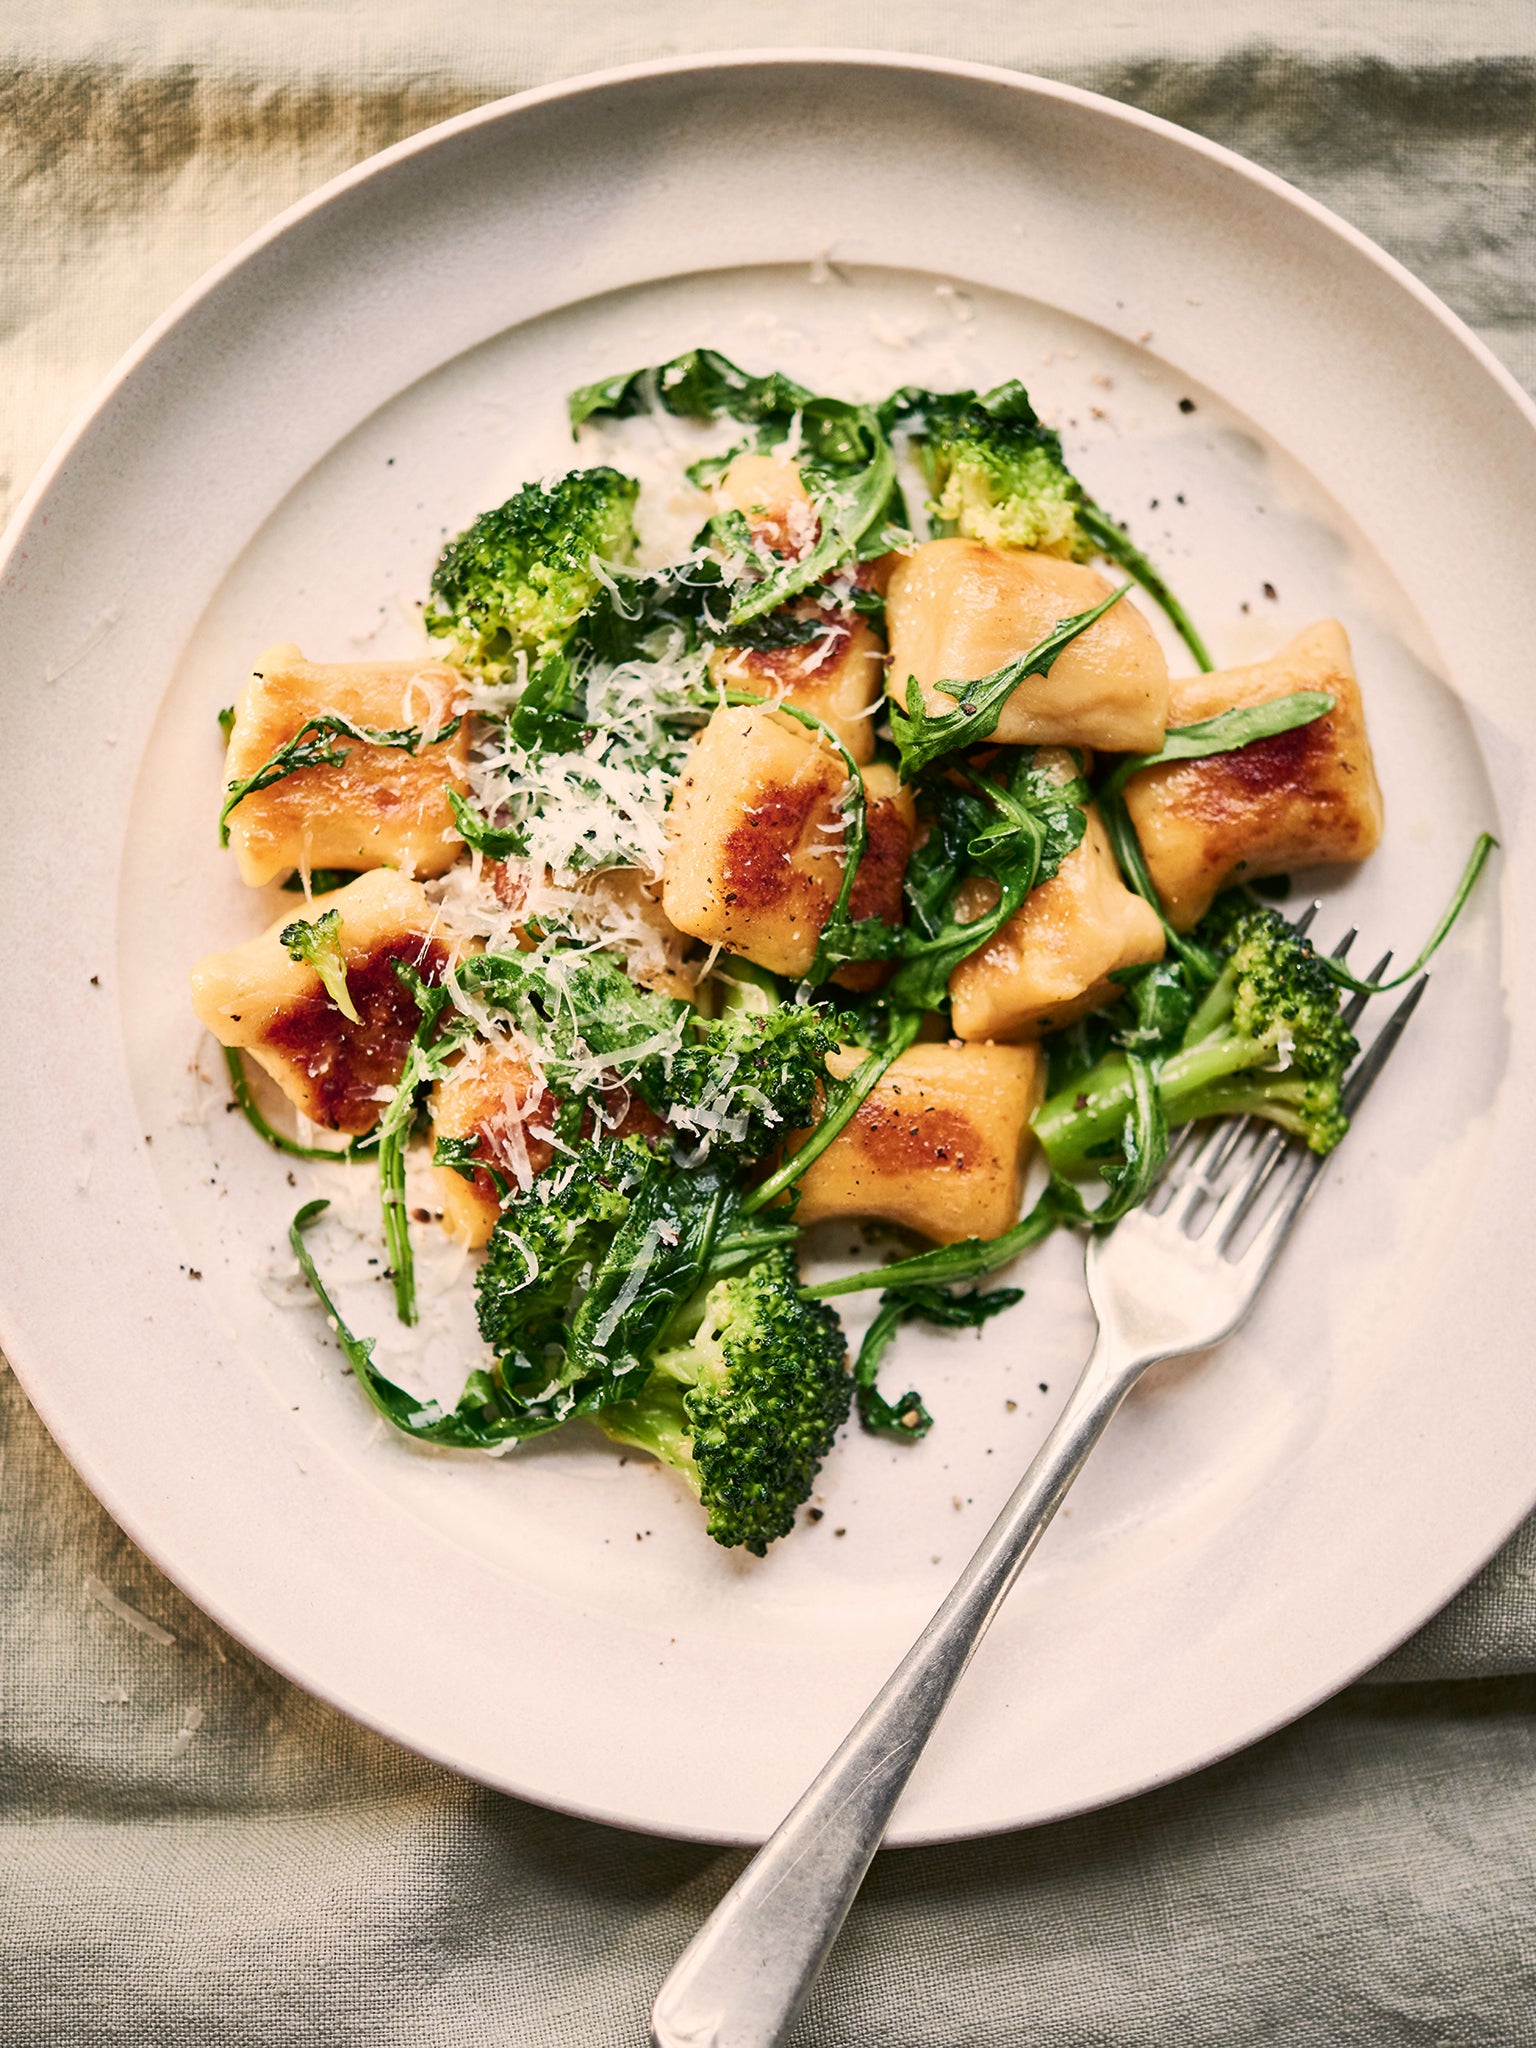 A great meat-free midweek dish